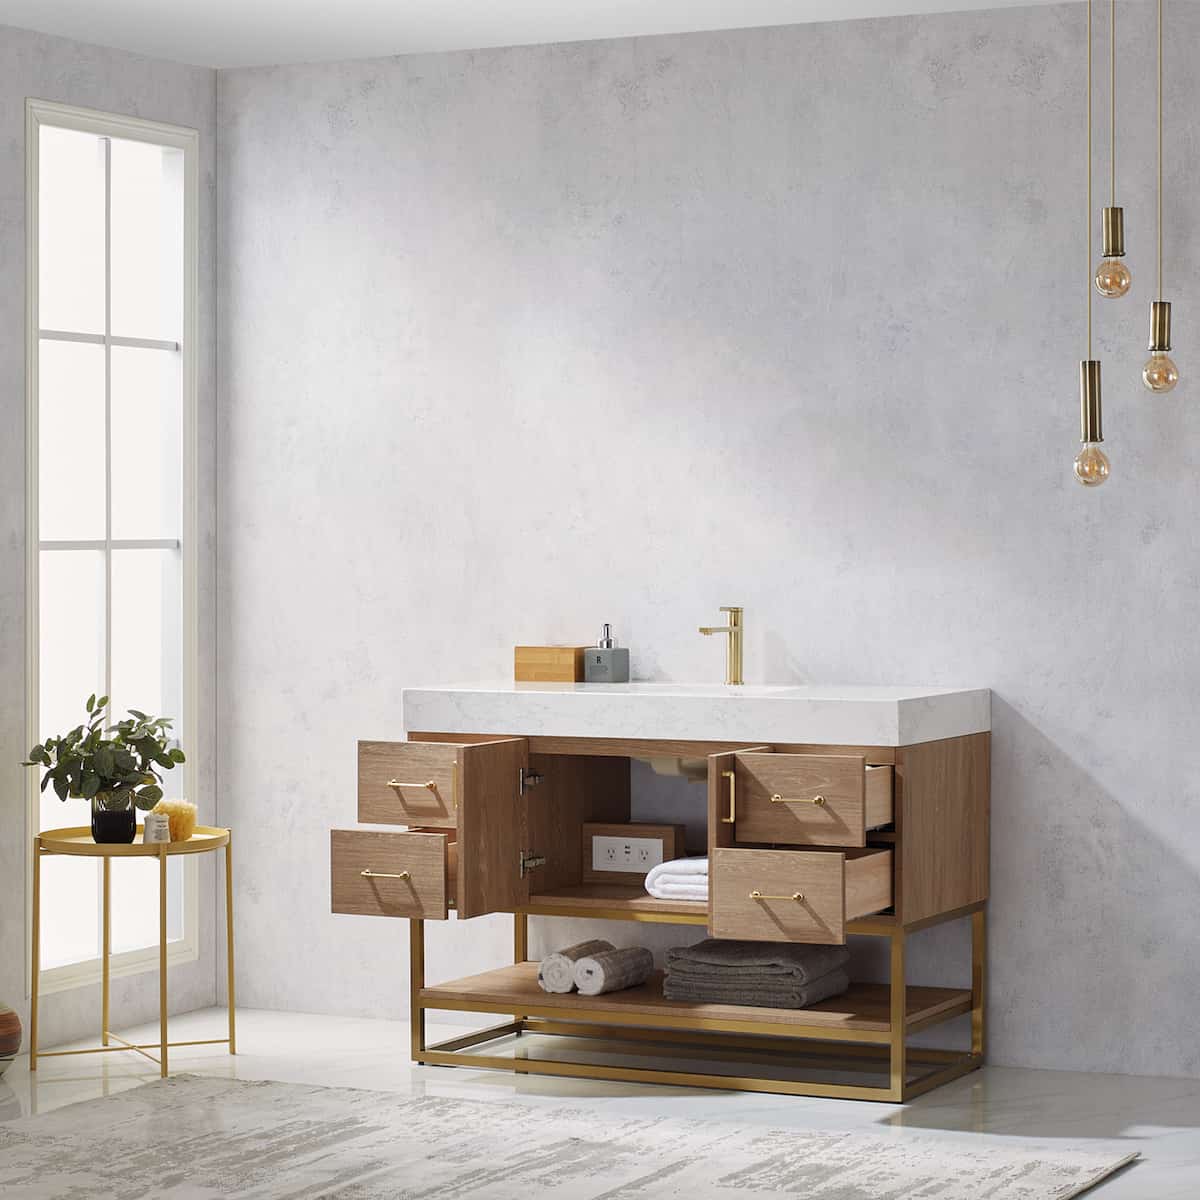 Vinnova Alistair 48 Inch Freestanding Single Vanity in North American Oak and Brushed Gold Frame with White Grain Stone Countertop Without Mirror Inside 789048-NO-GW-NM